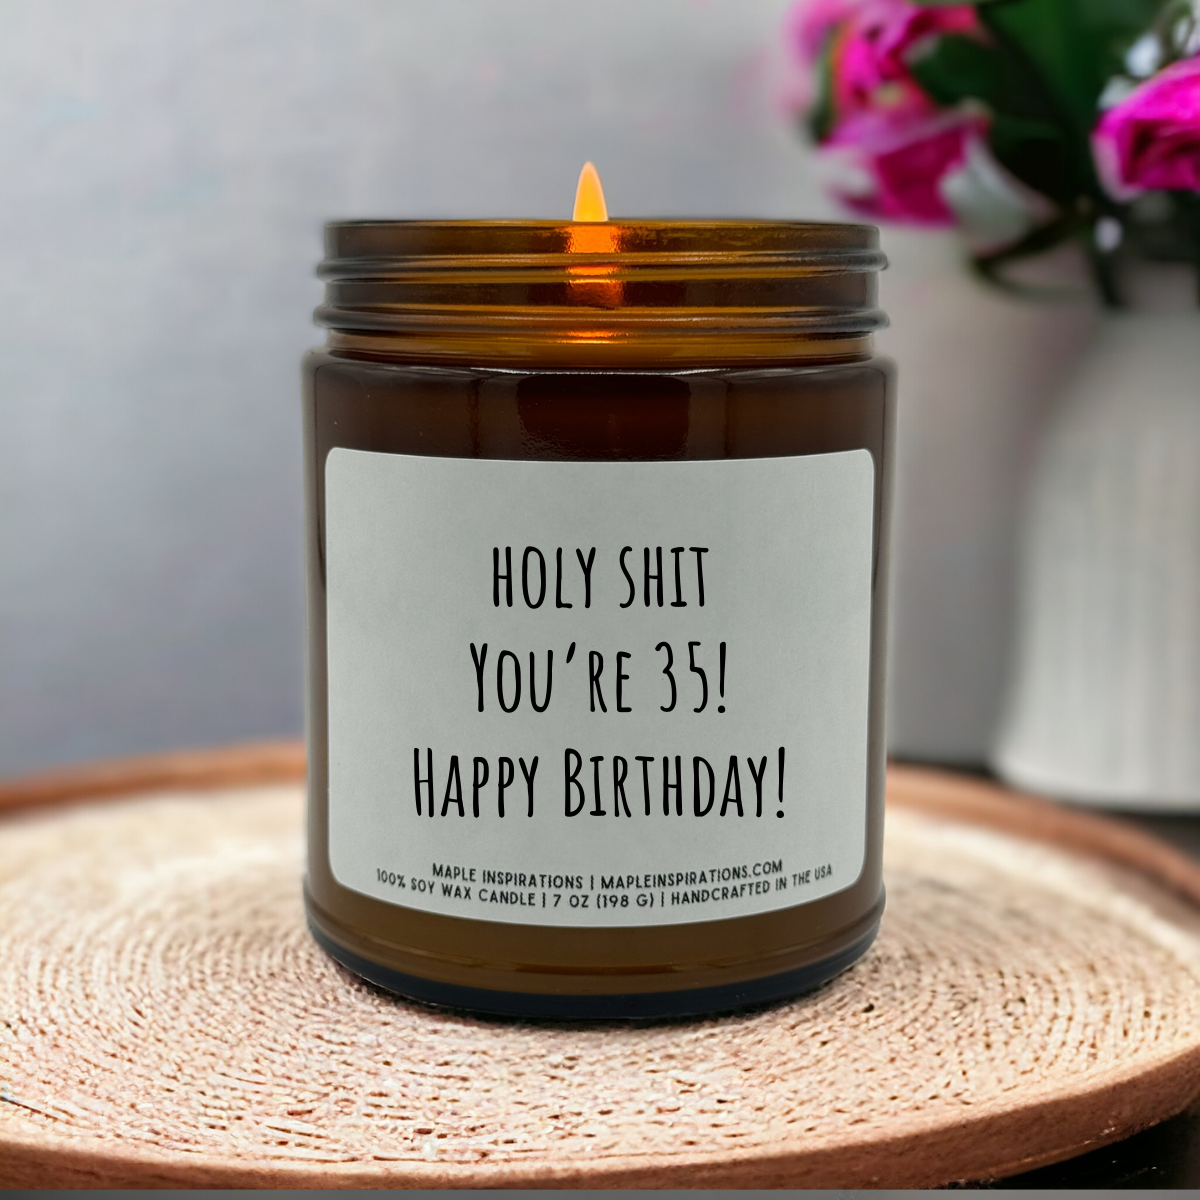 35th Birthday Gift, Funny Candle, Funny 35th Birthday Gift, Candle Gift For 35th Birthday Turning 35 Years Old, Holy Shit You're 35